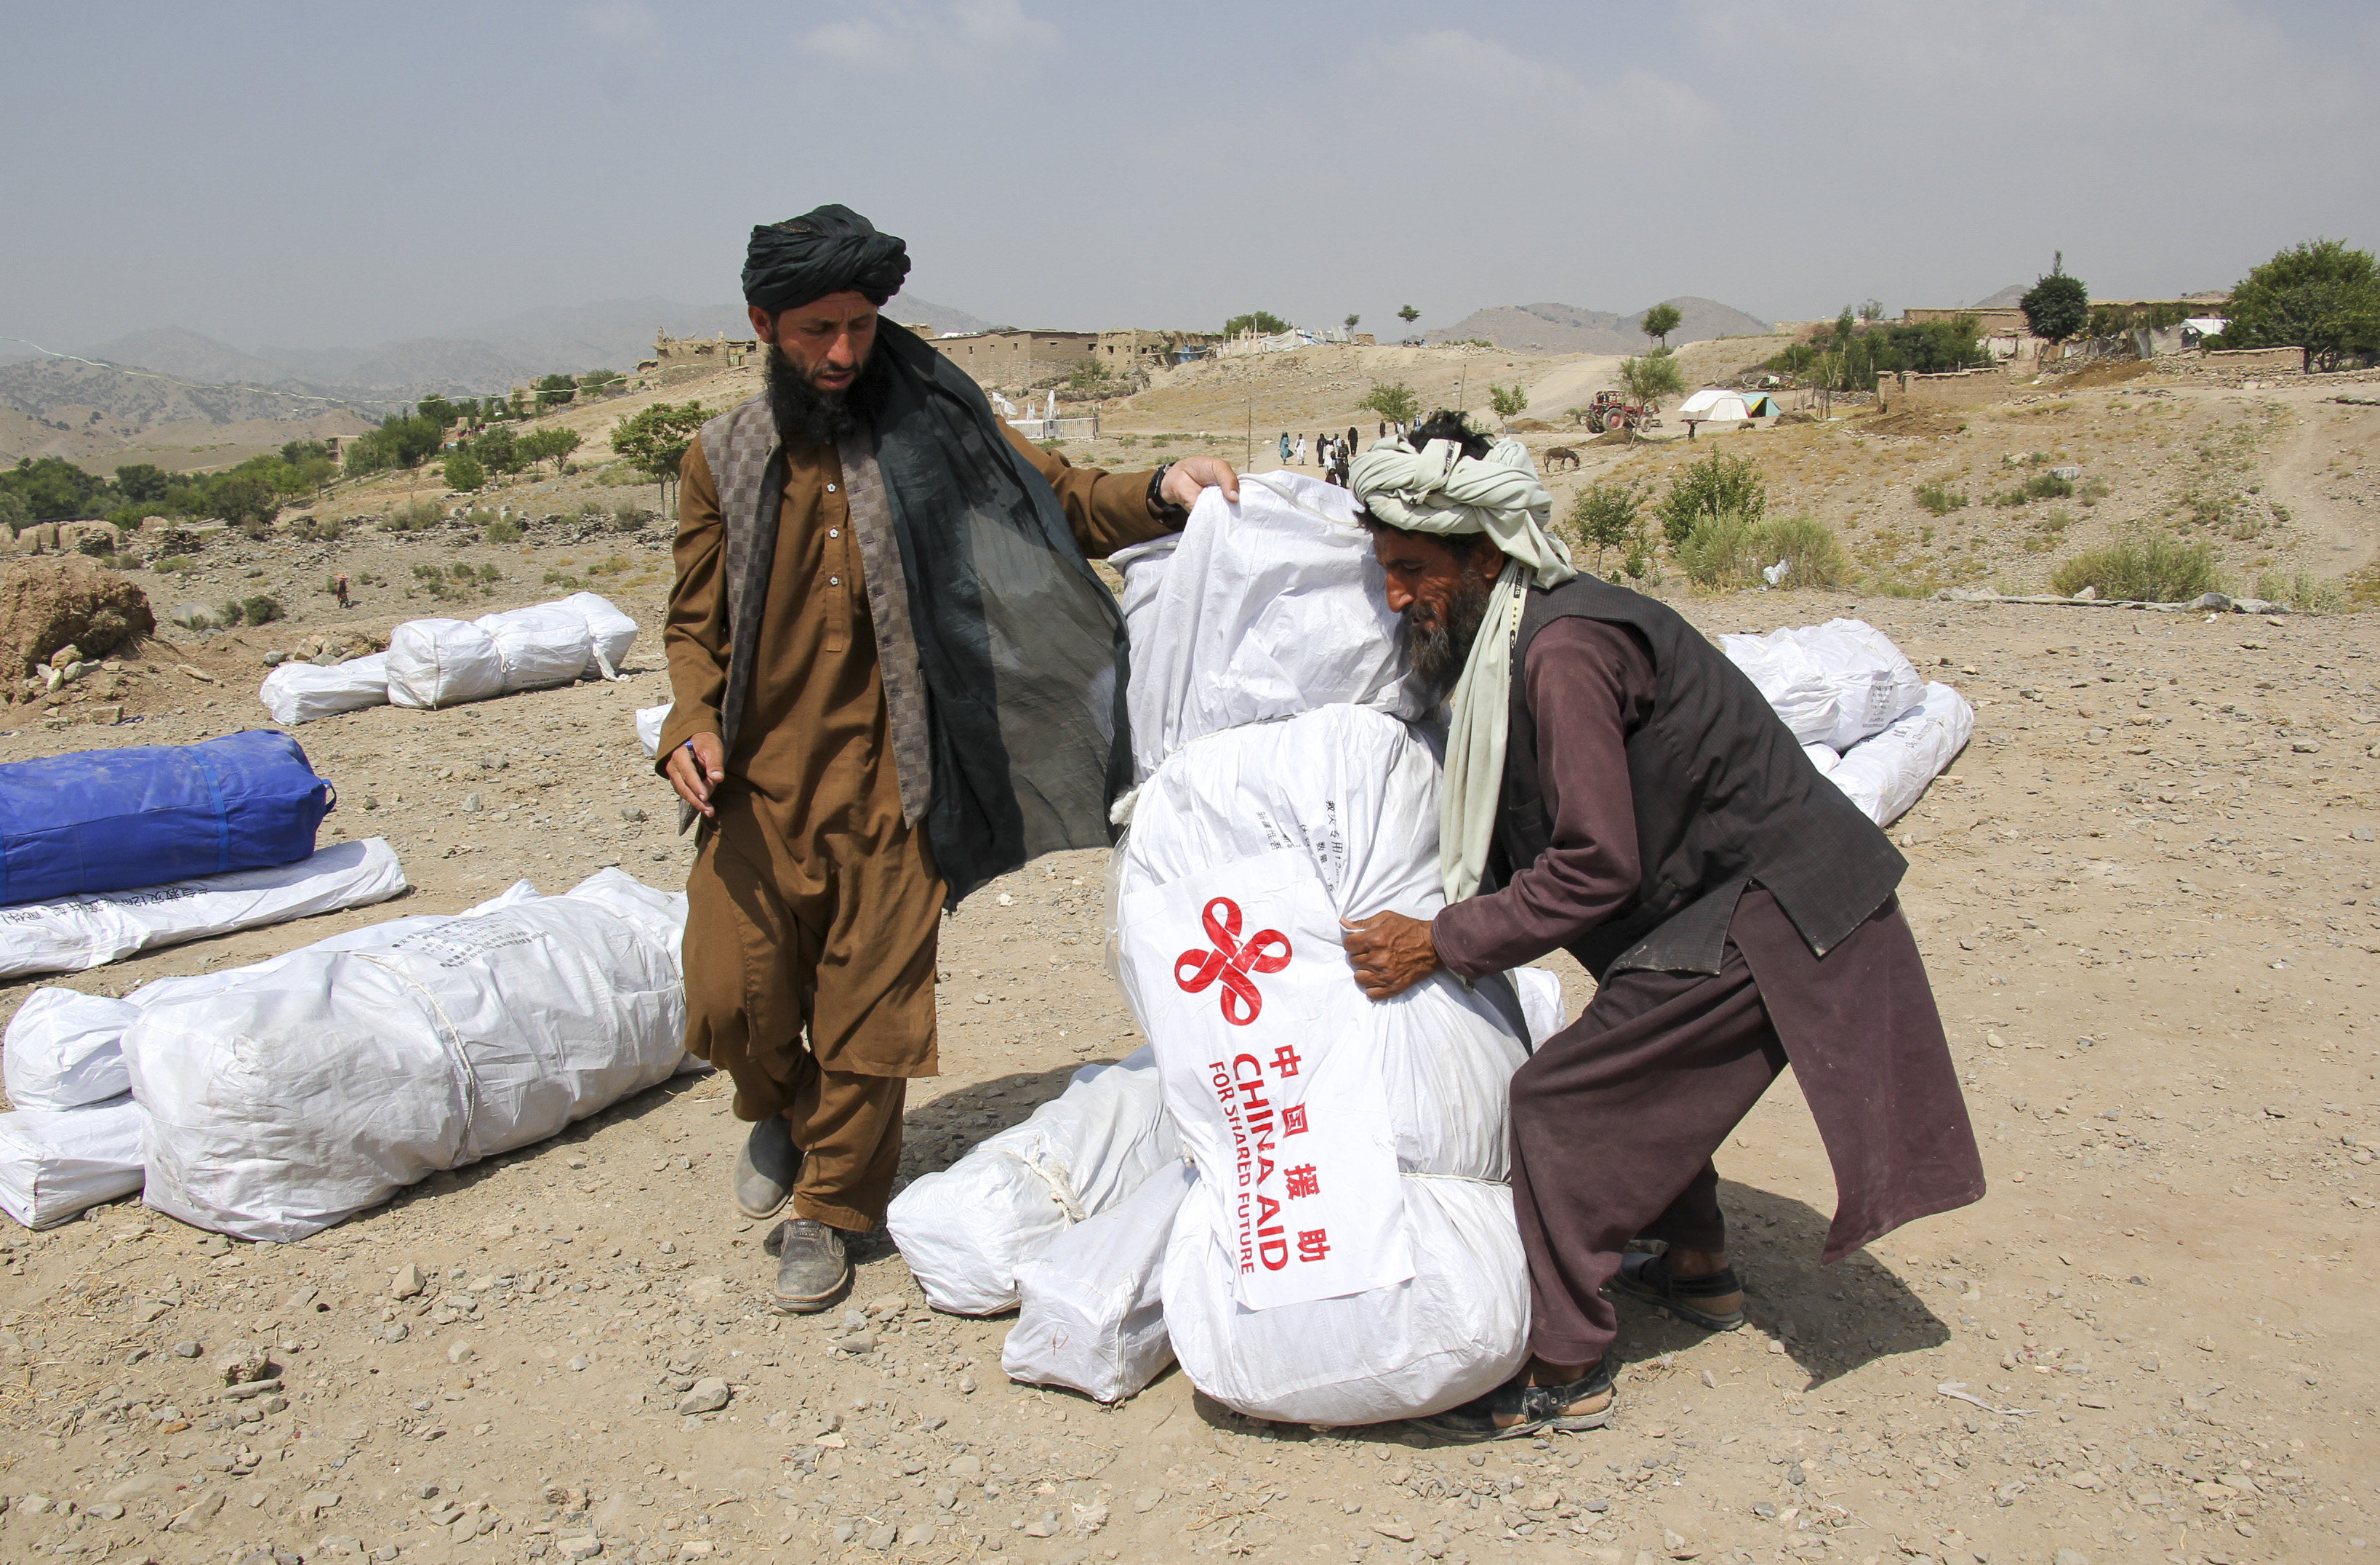 Men in eastern Afghanistan carry earthquake relief supplies from China on July 2. Photo: Xinhua